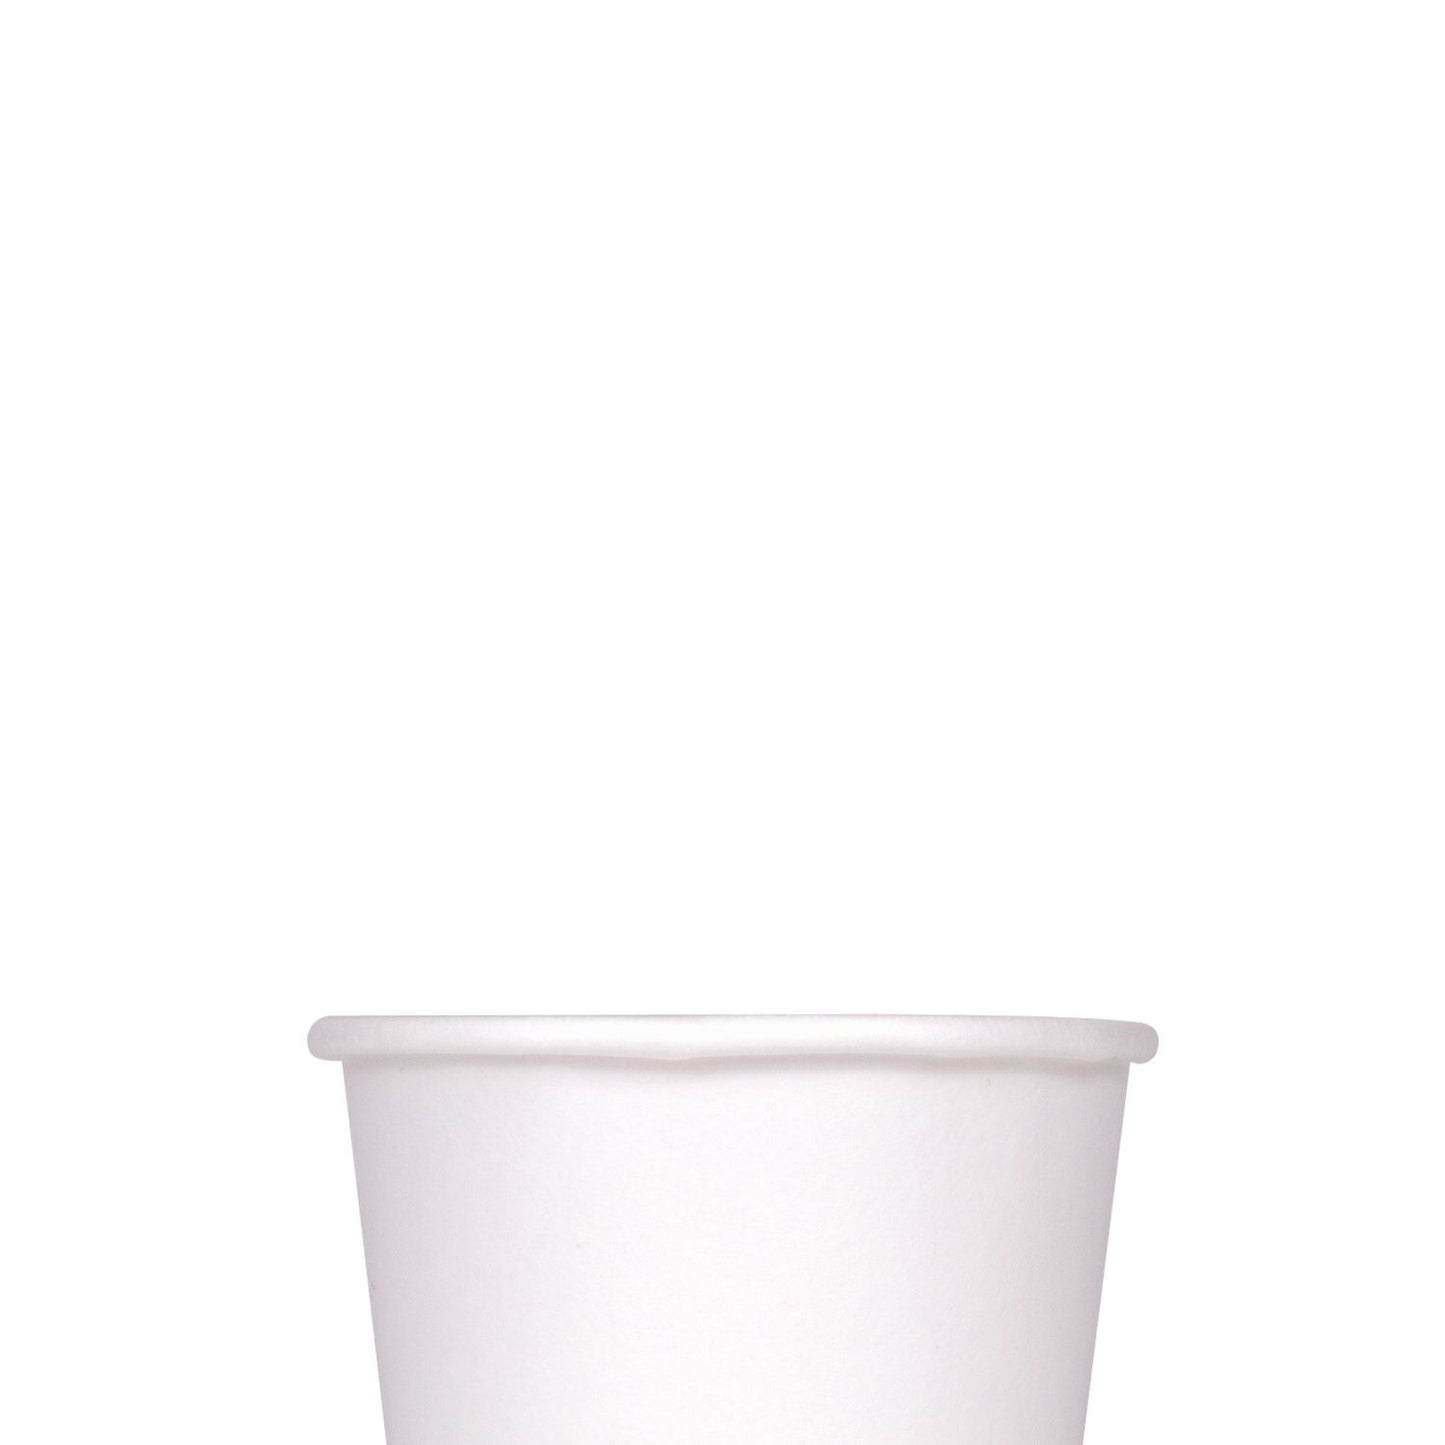 Karat 2oz Food Containers - White (51mm) - 2,000 ct